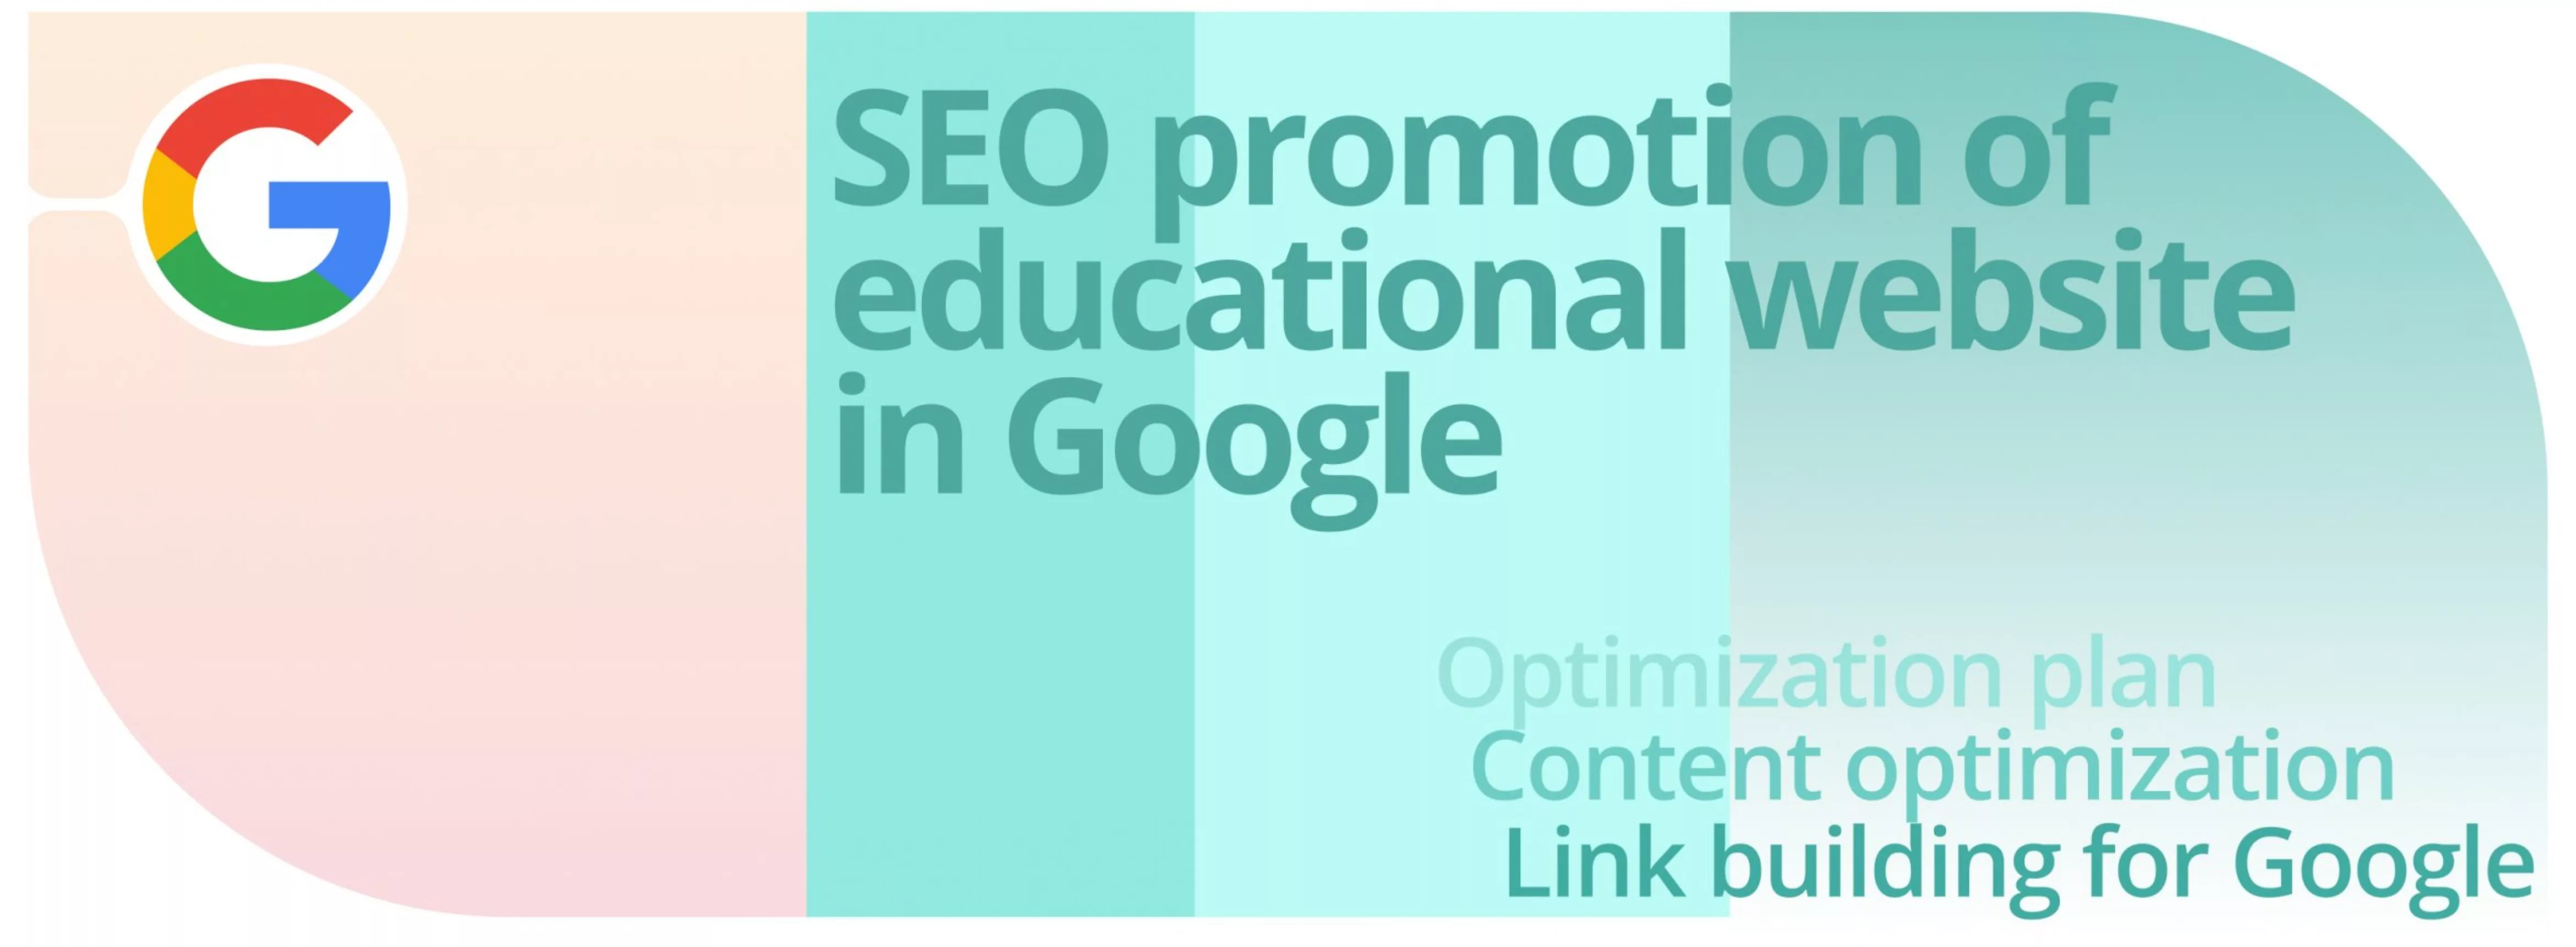 Case: SEO promotion of educational website in Google.